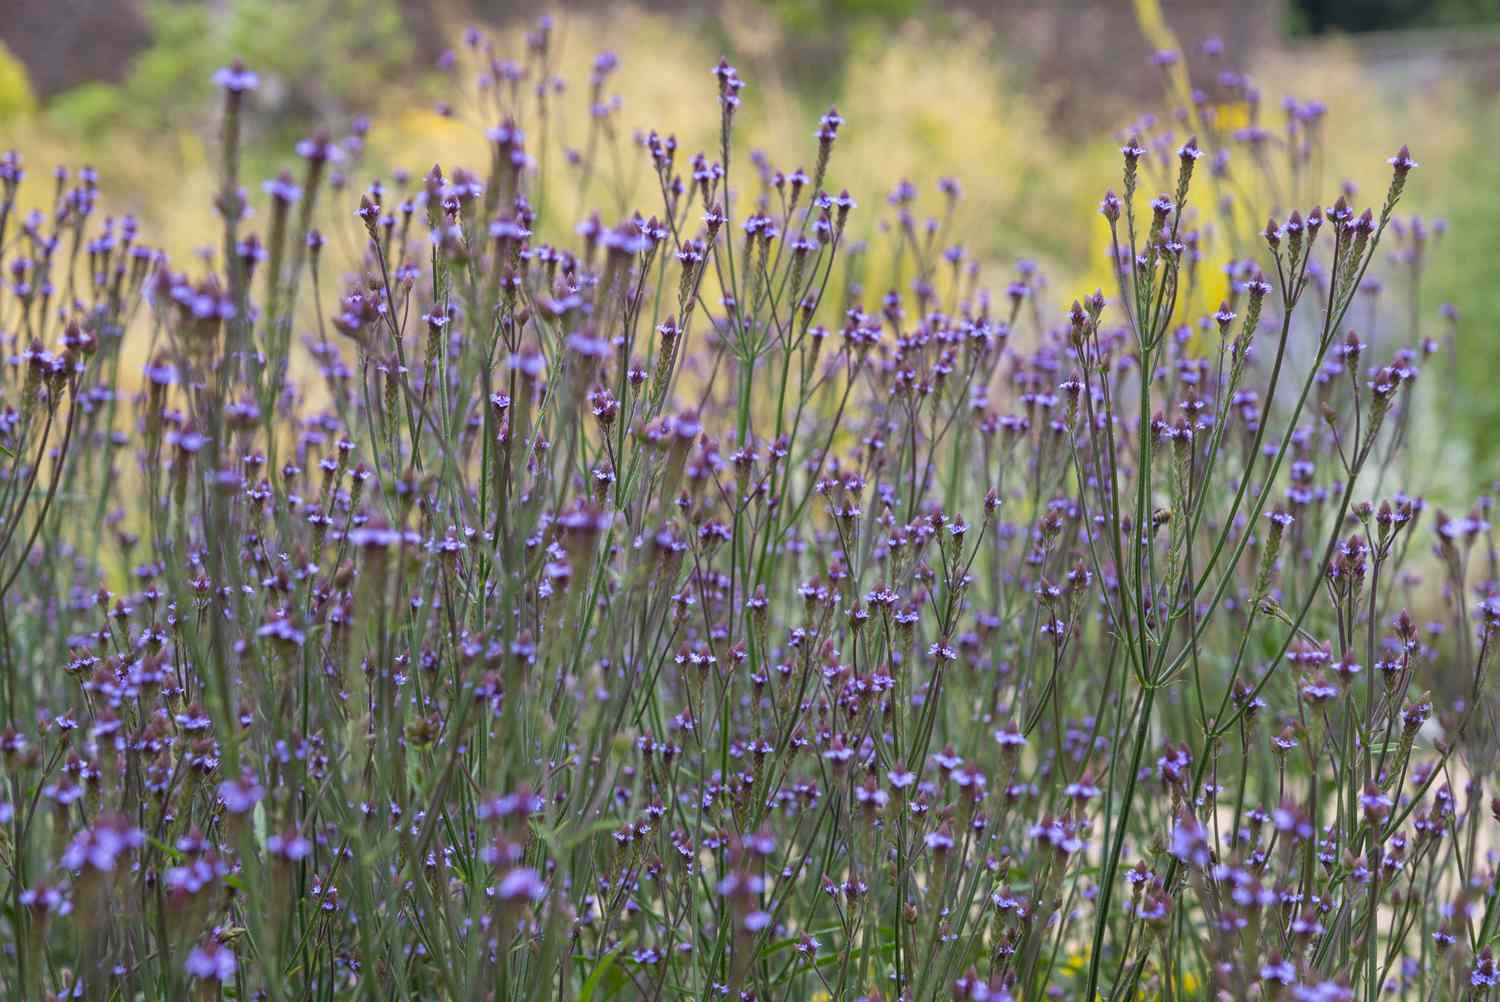 Stand of blue vervain plants in bloom.